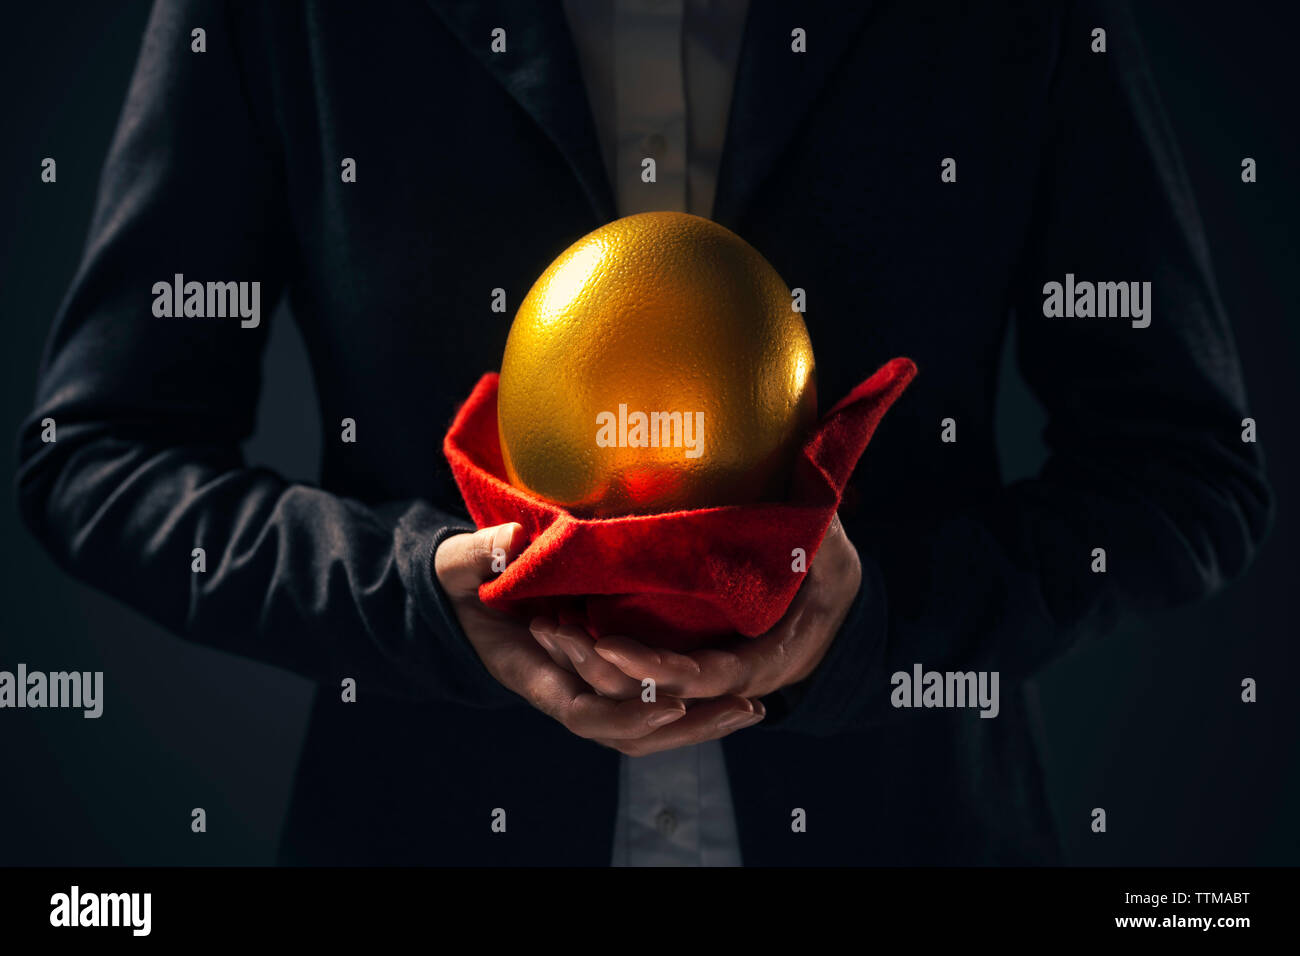 Large golden egg in hands of businesswoman acting as stockholder or investor in business investment Stock Photo